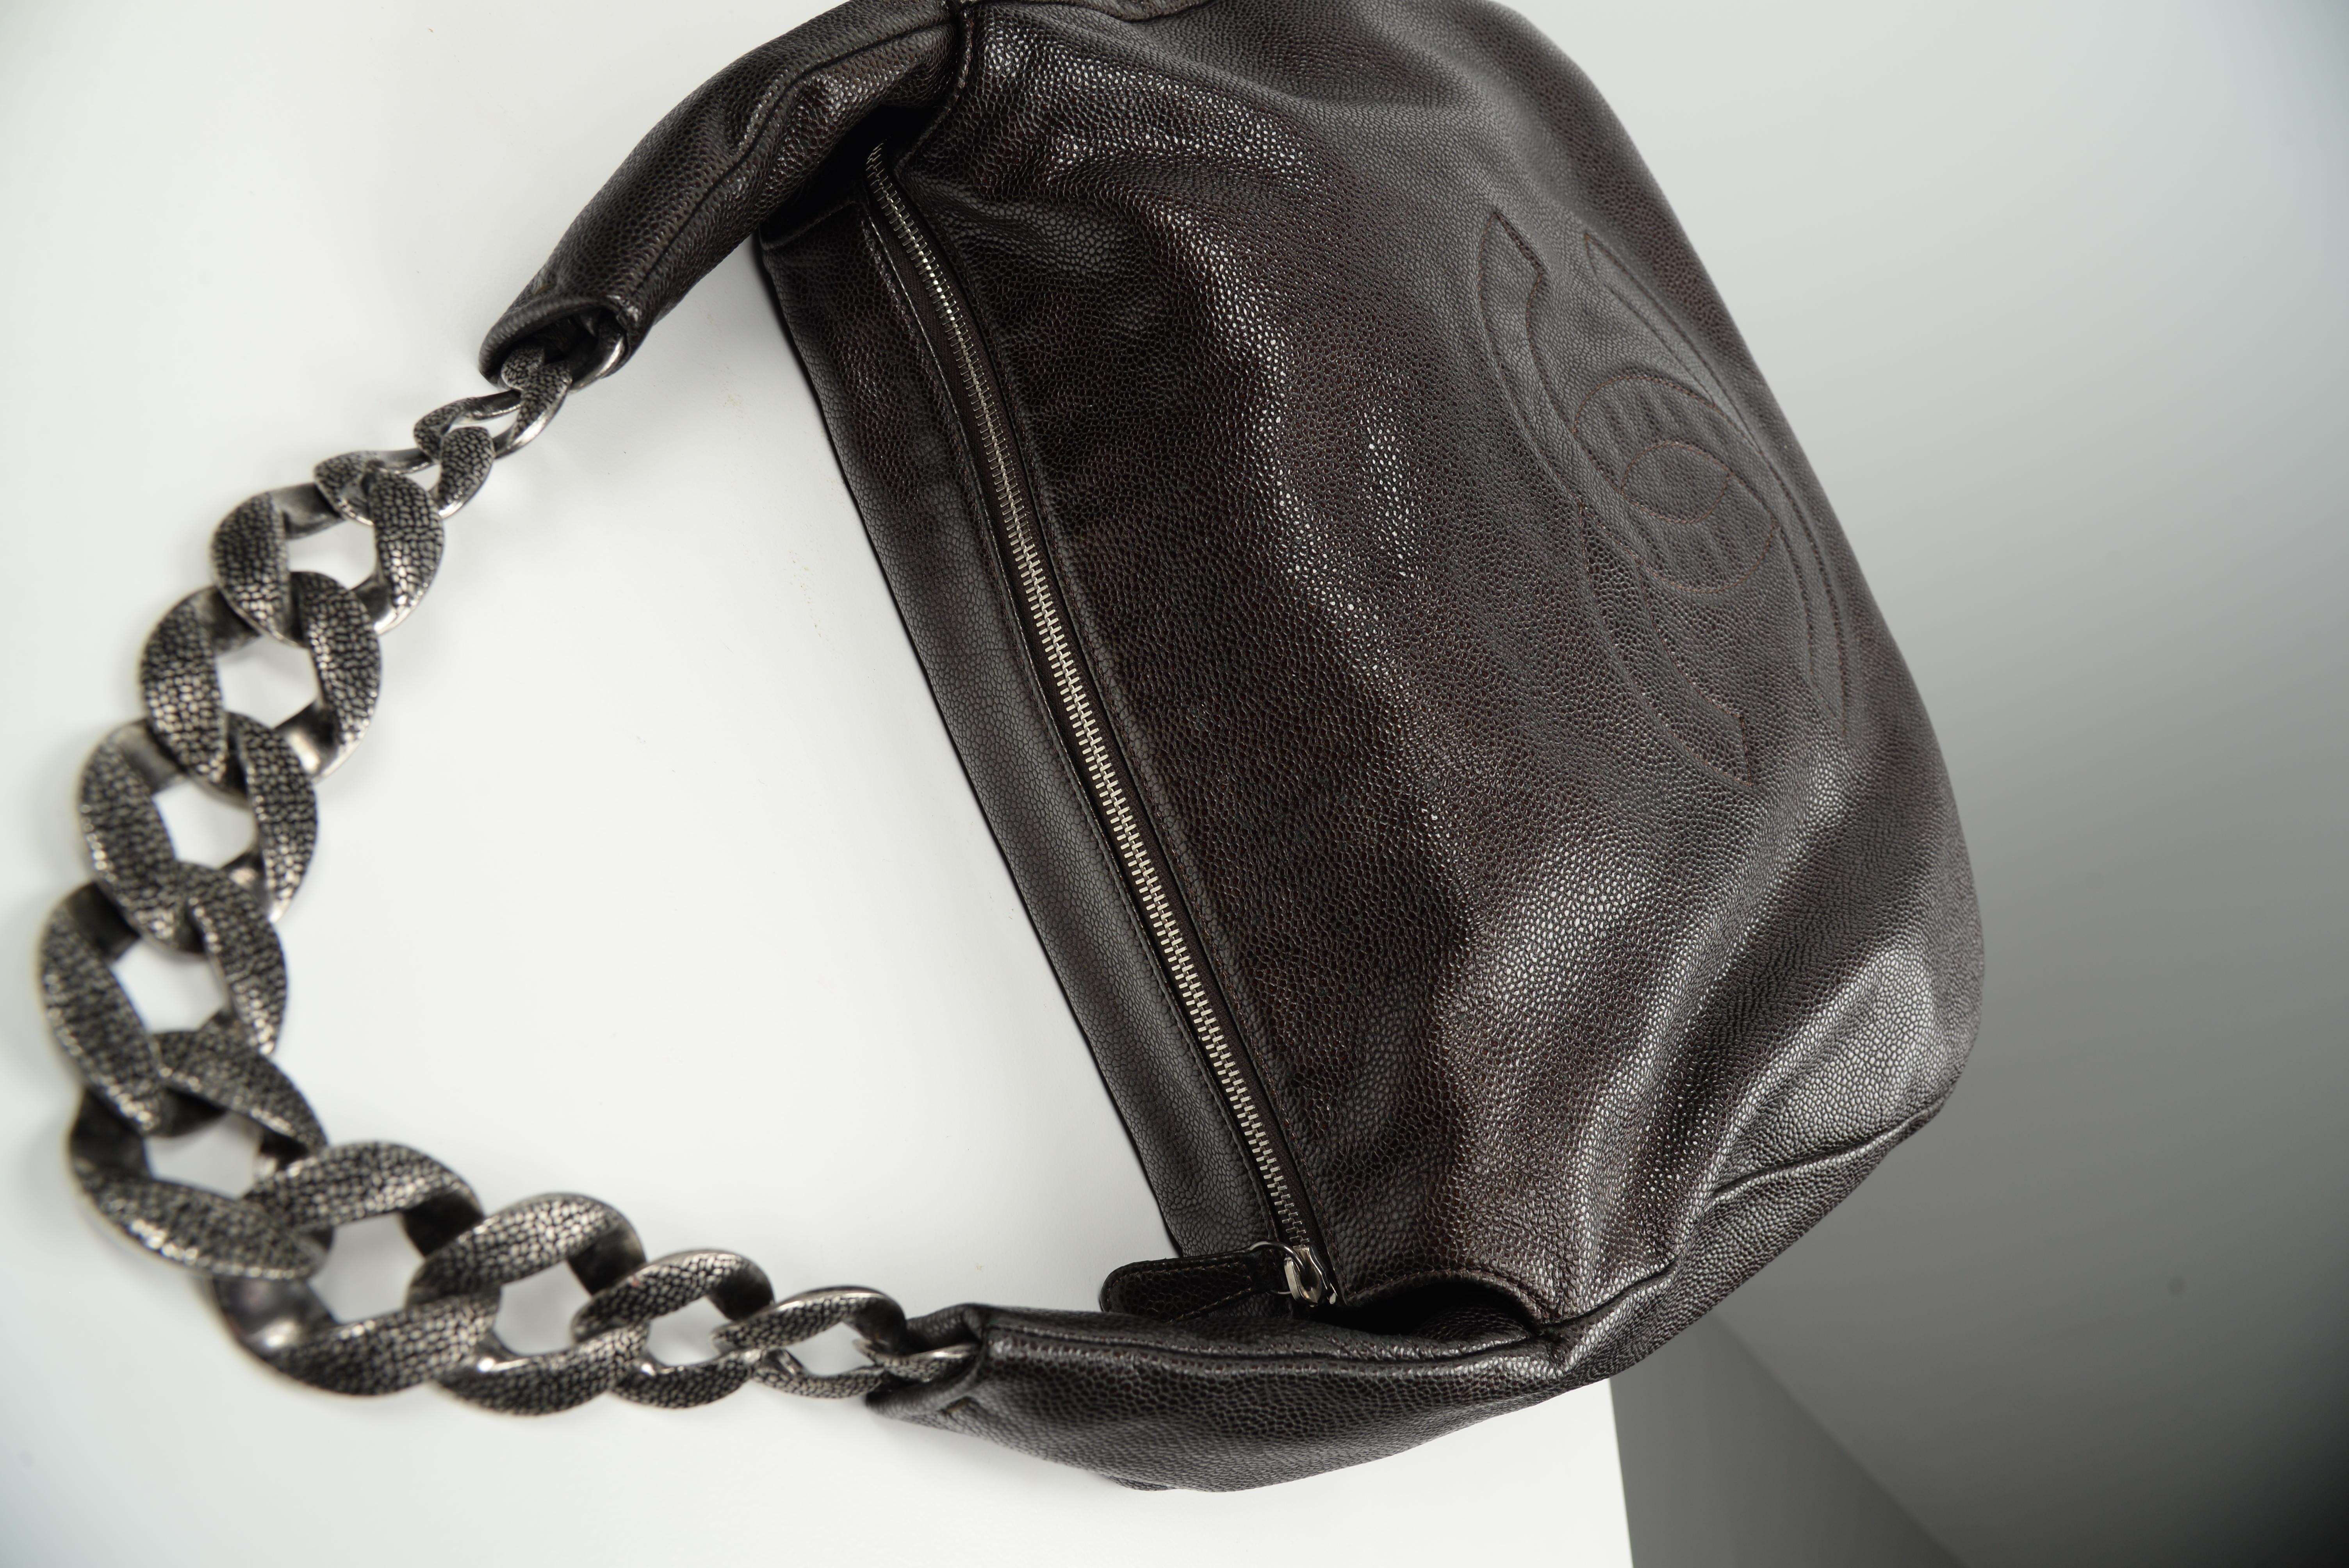 Women's or Men's Chanel Hobo Chain Bag Caviar Leather Shoulder Bag Tote For Sale